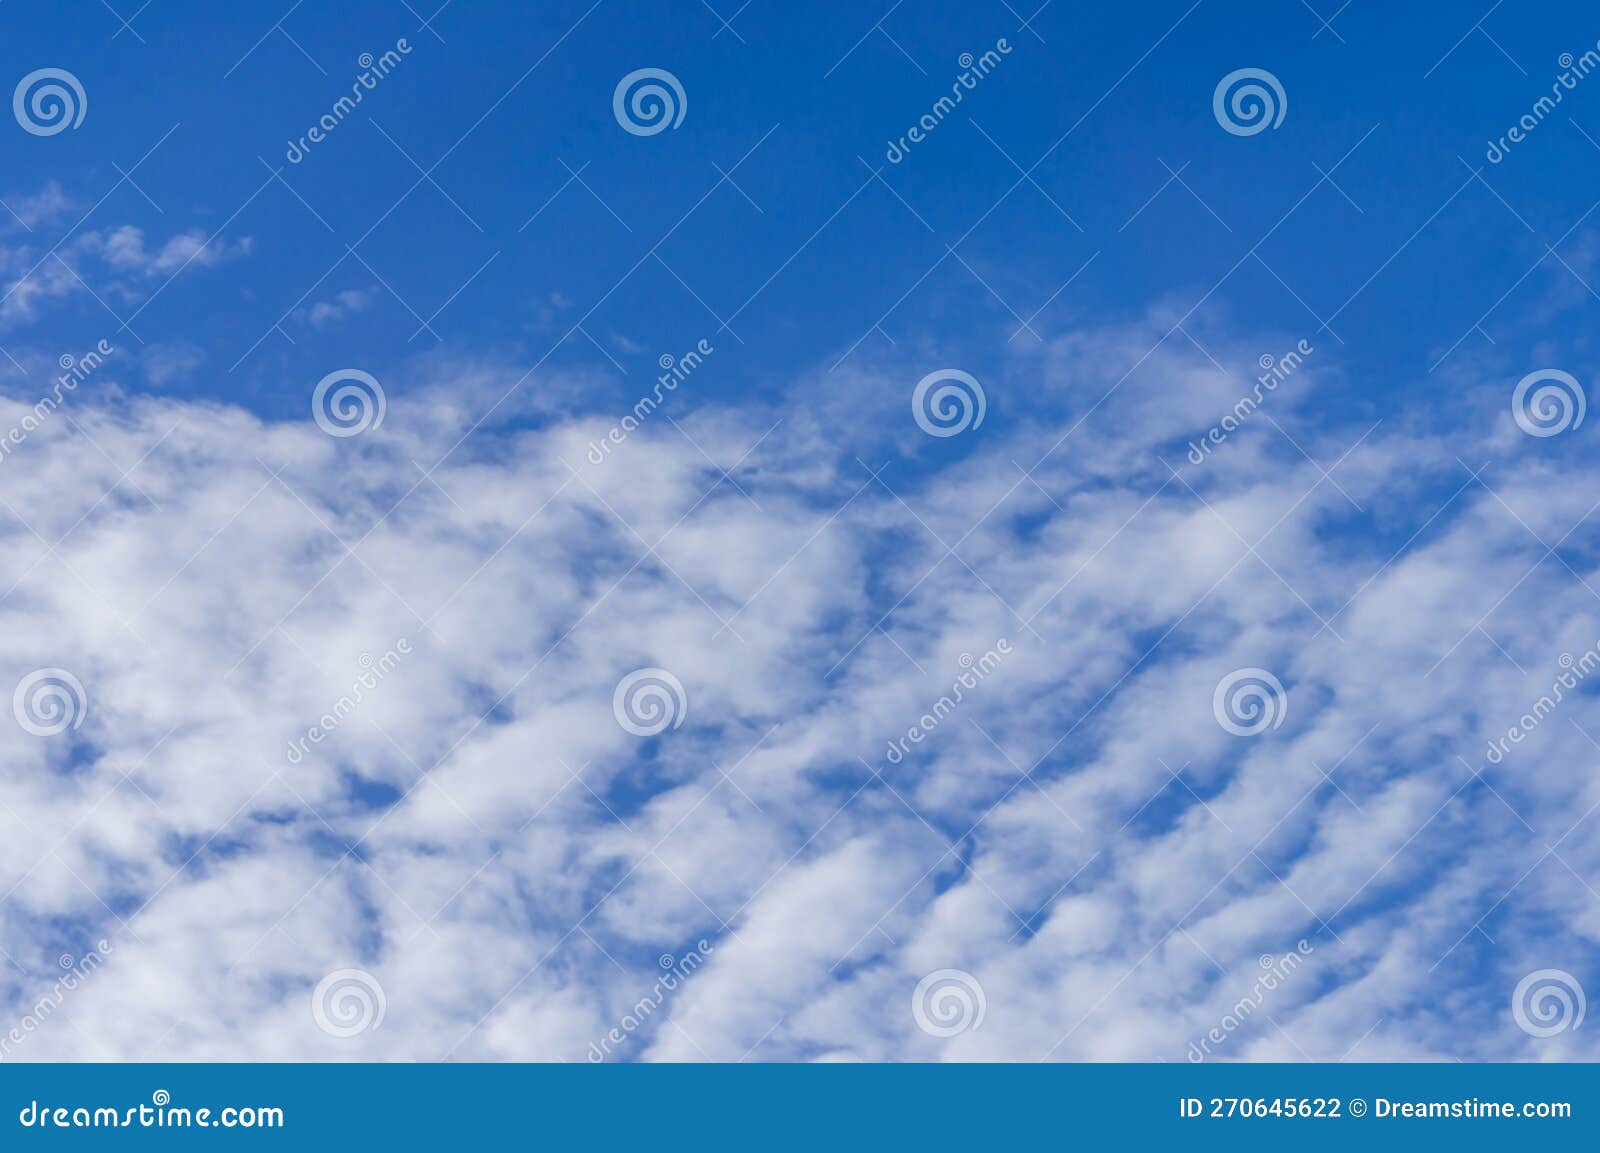 Fluffy white cloud, floating in clear blue sky